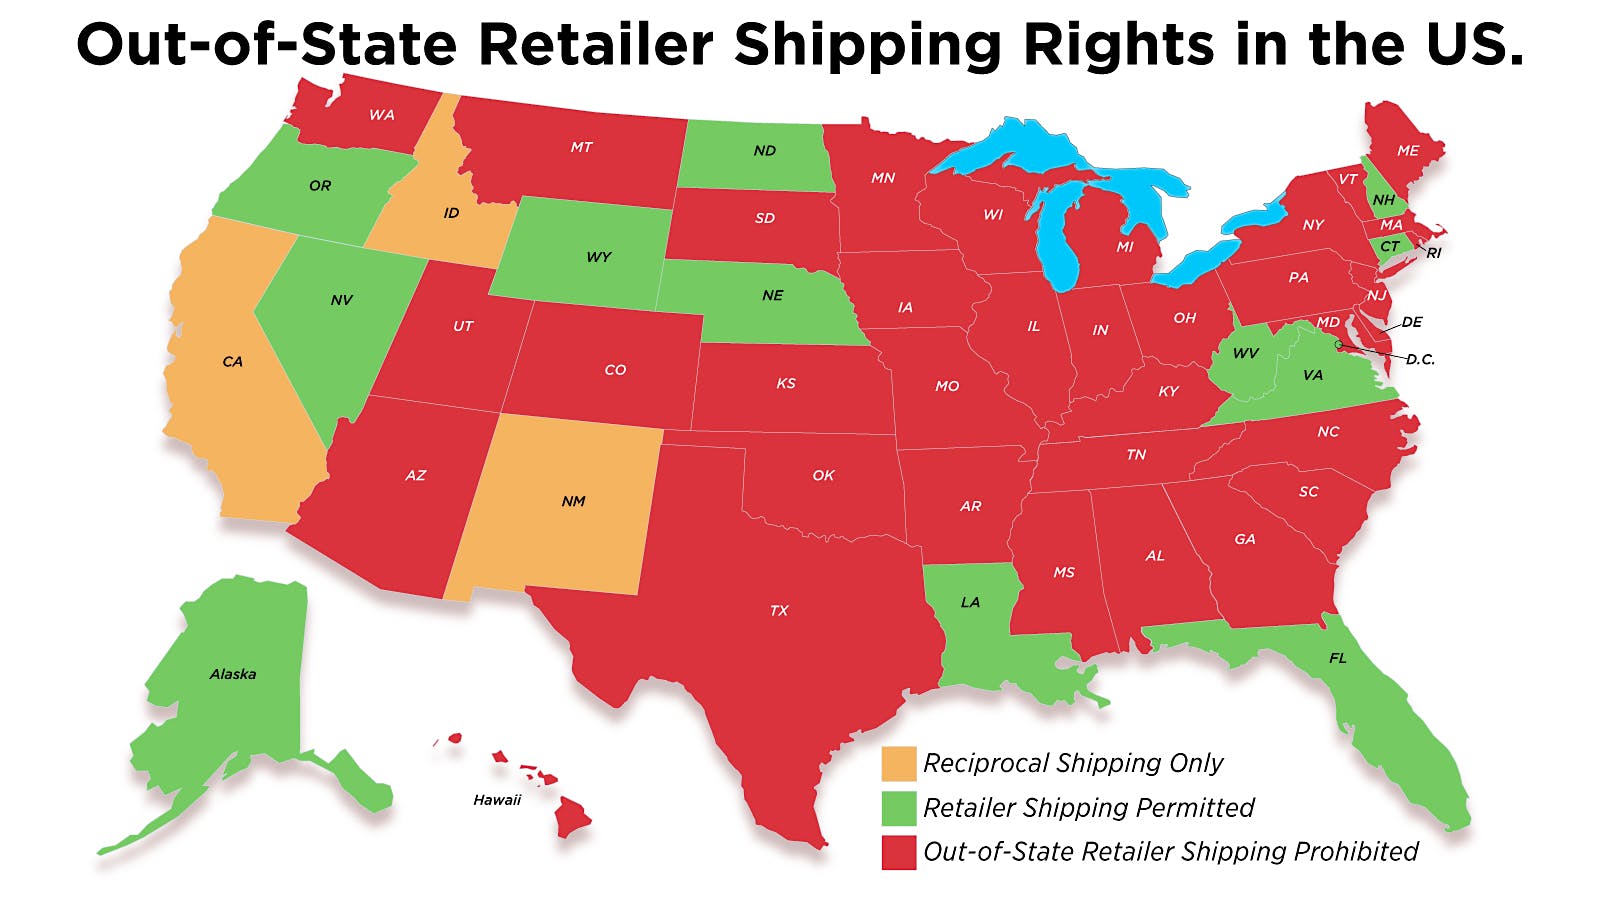 A map of the U.S. with states in red, yellow or green depending on their retailer shipping laws, which are outlined below.